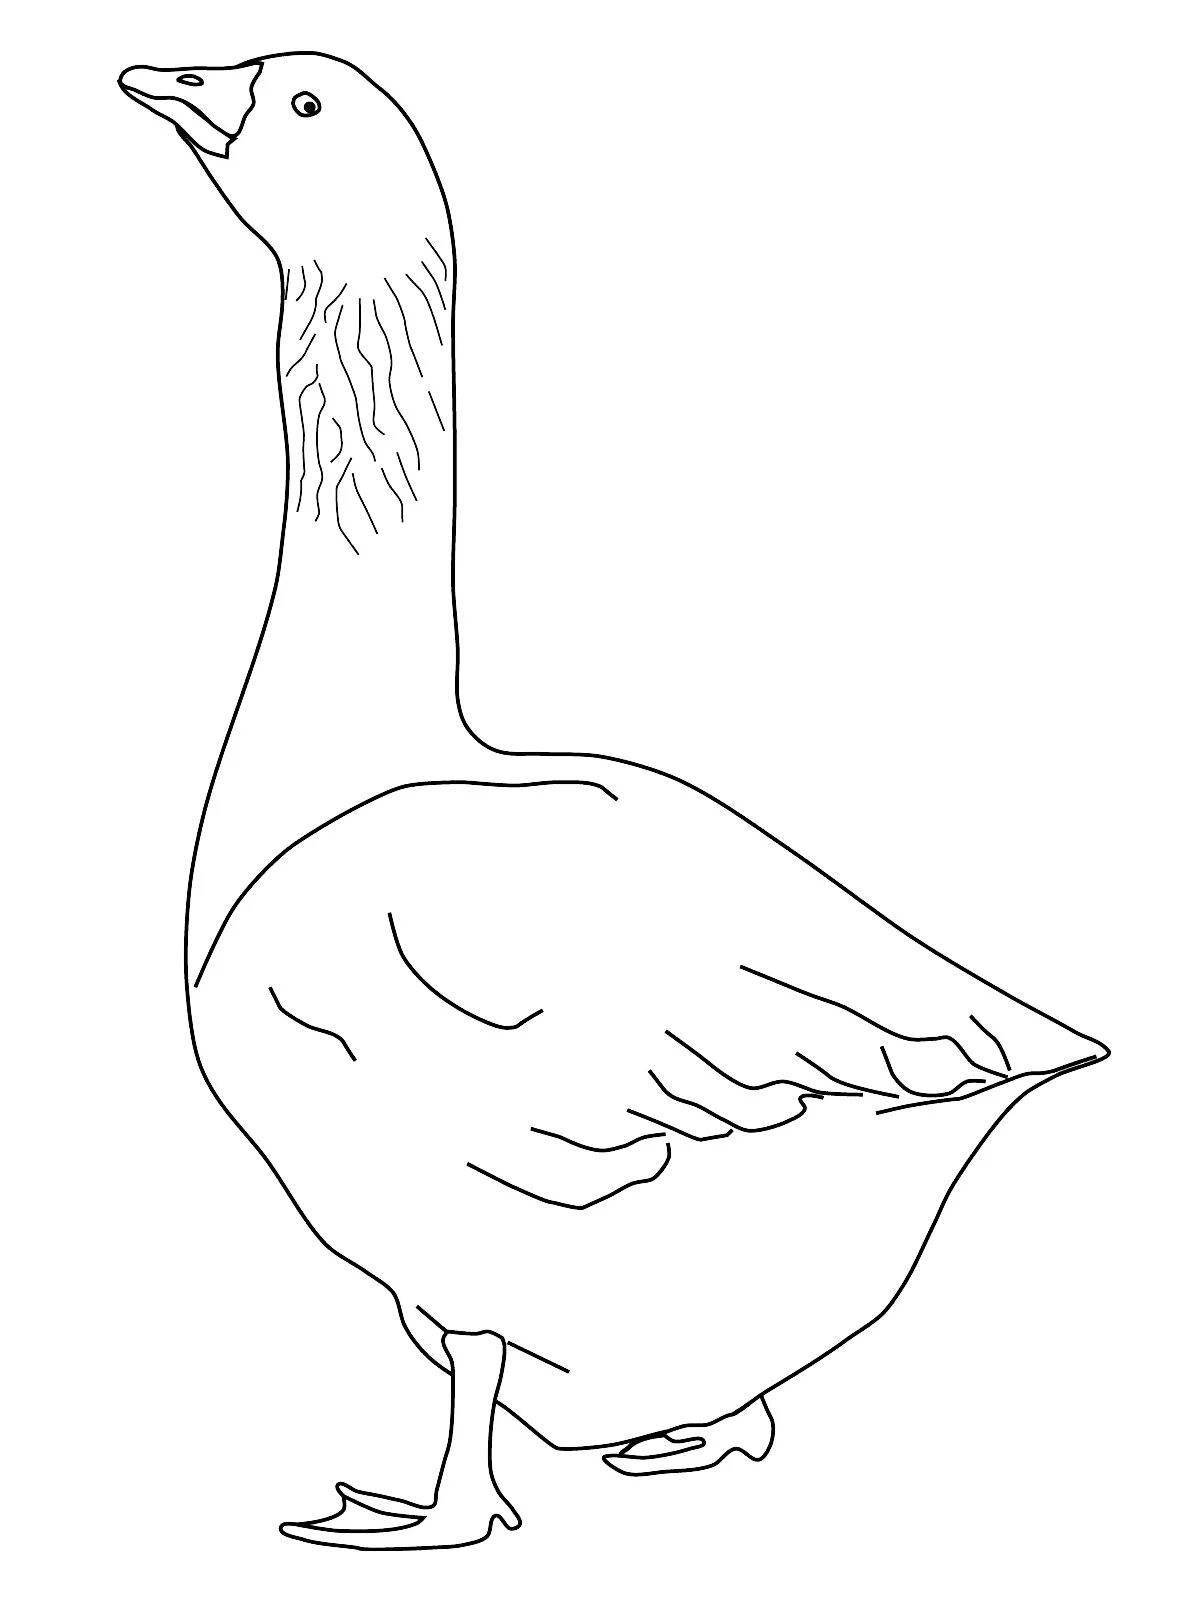 Playful geese coloring pages for girls